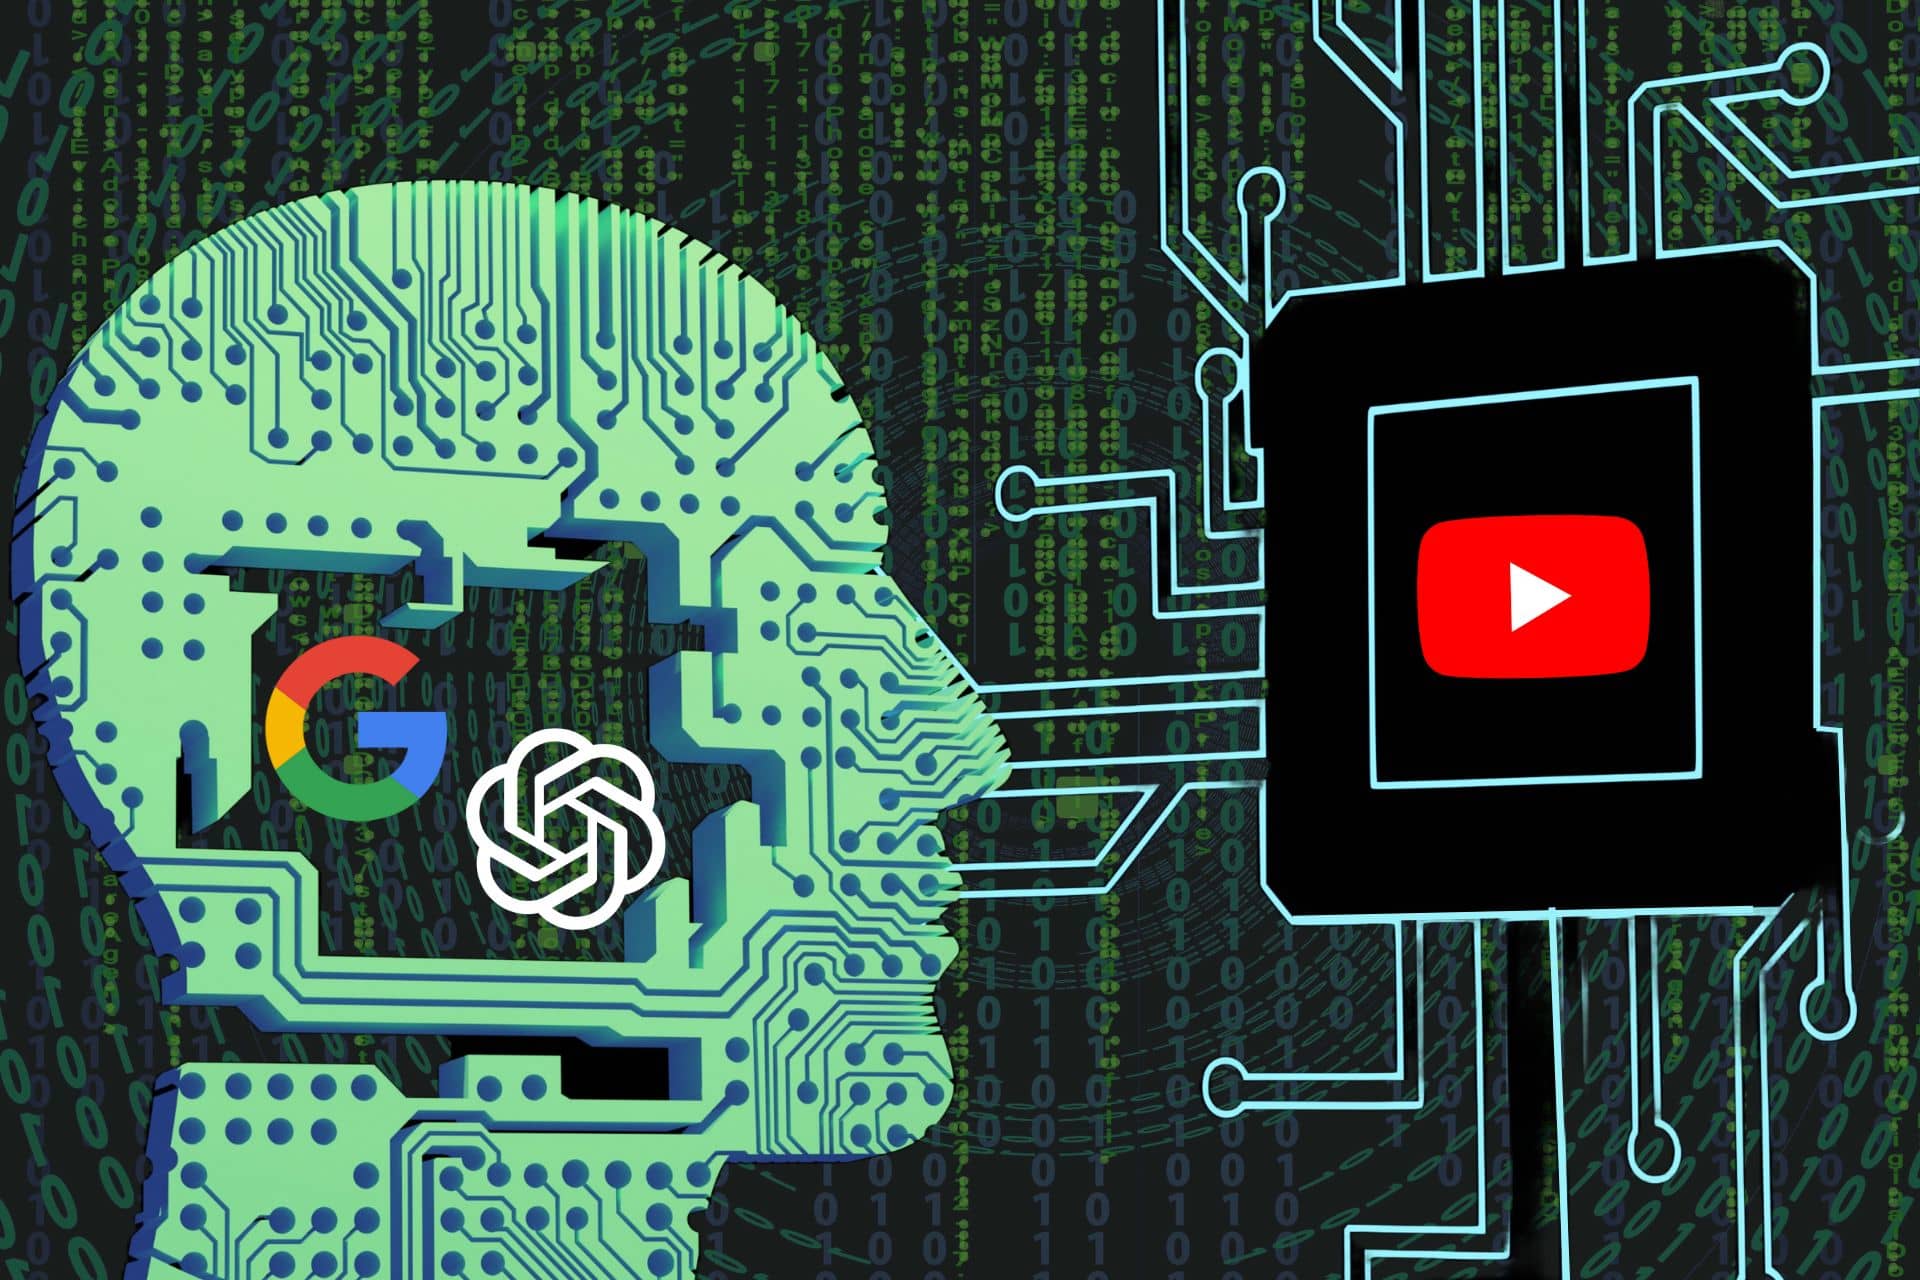 Google reportedly allowed OpenAI to scrap data from YouTube videos for GPT-4 training